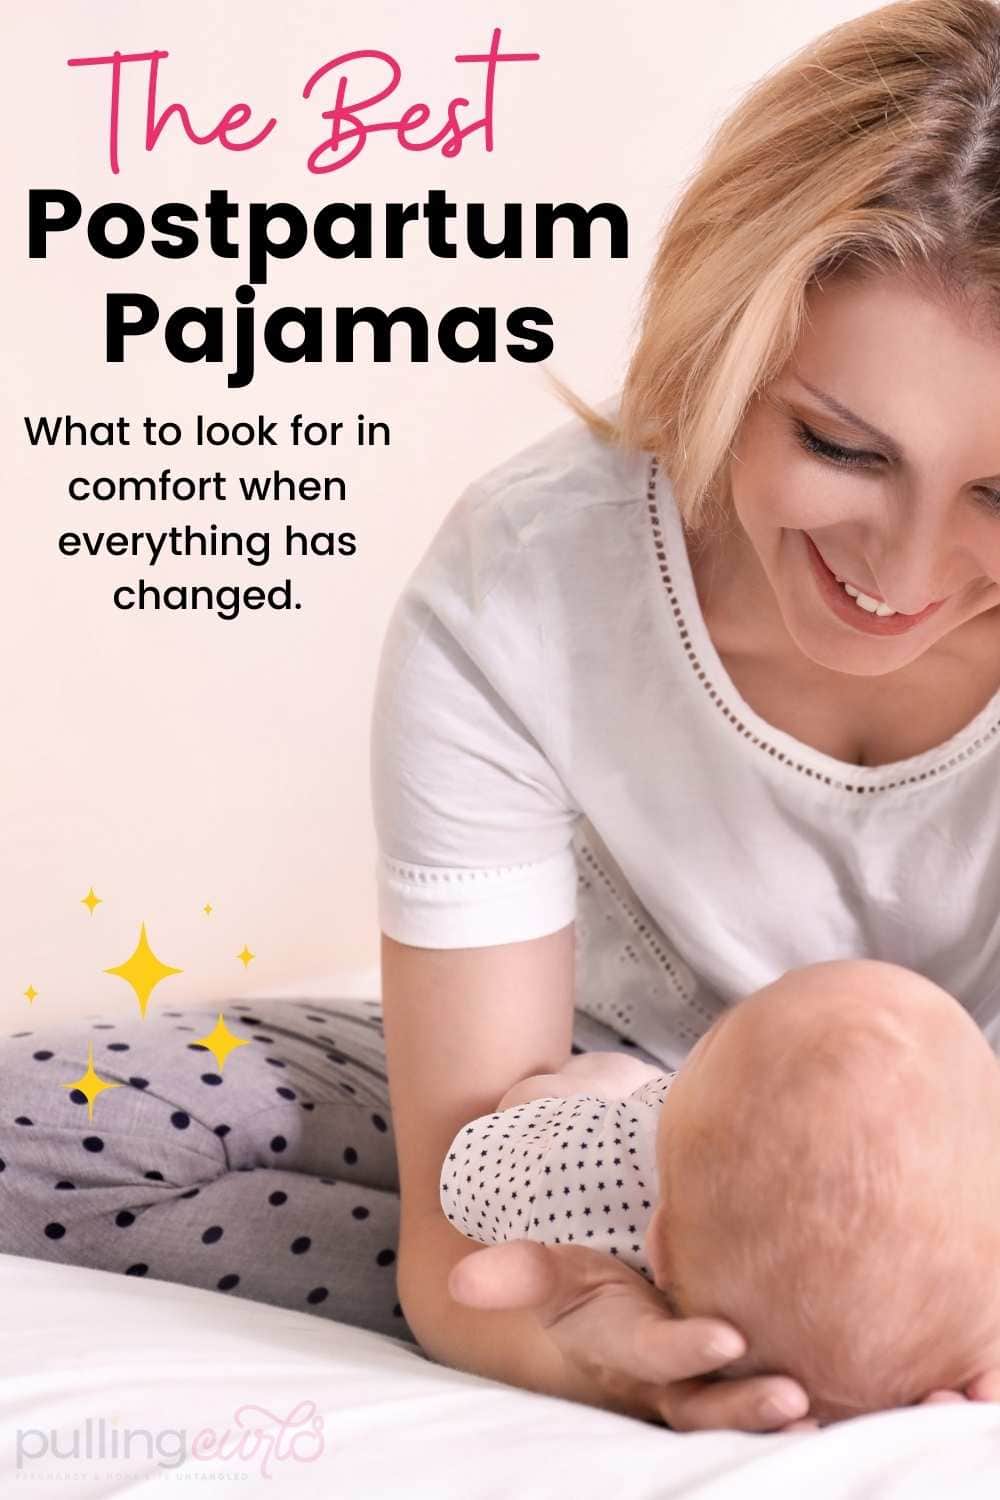 Finding a pajama set that you’ll find comfortable as a new mom is a must.  Today we’re going to show you some of the best to put in your hospital bag with easy breastfeeding access. via @pullingcurls